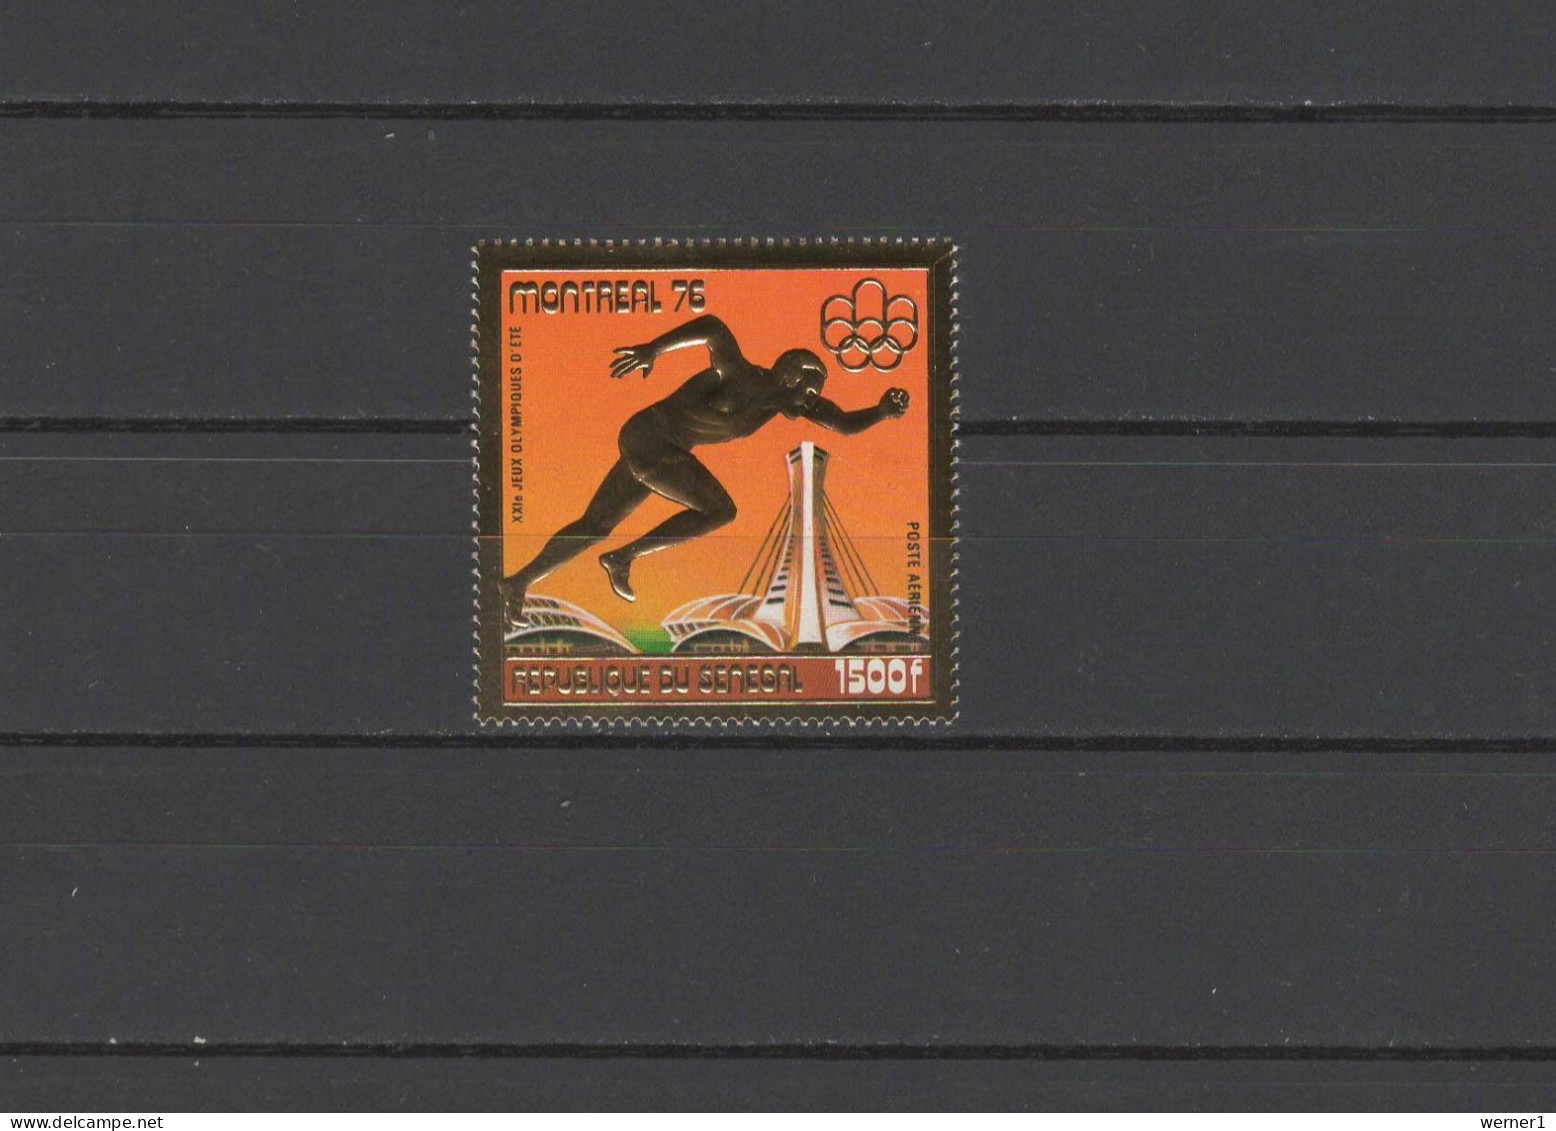 Senegal 1976 Olympic Games Montreal, Athletics Gold Stamp MNH - Sommer 1976: Montreal